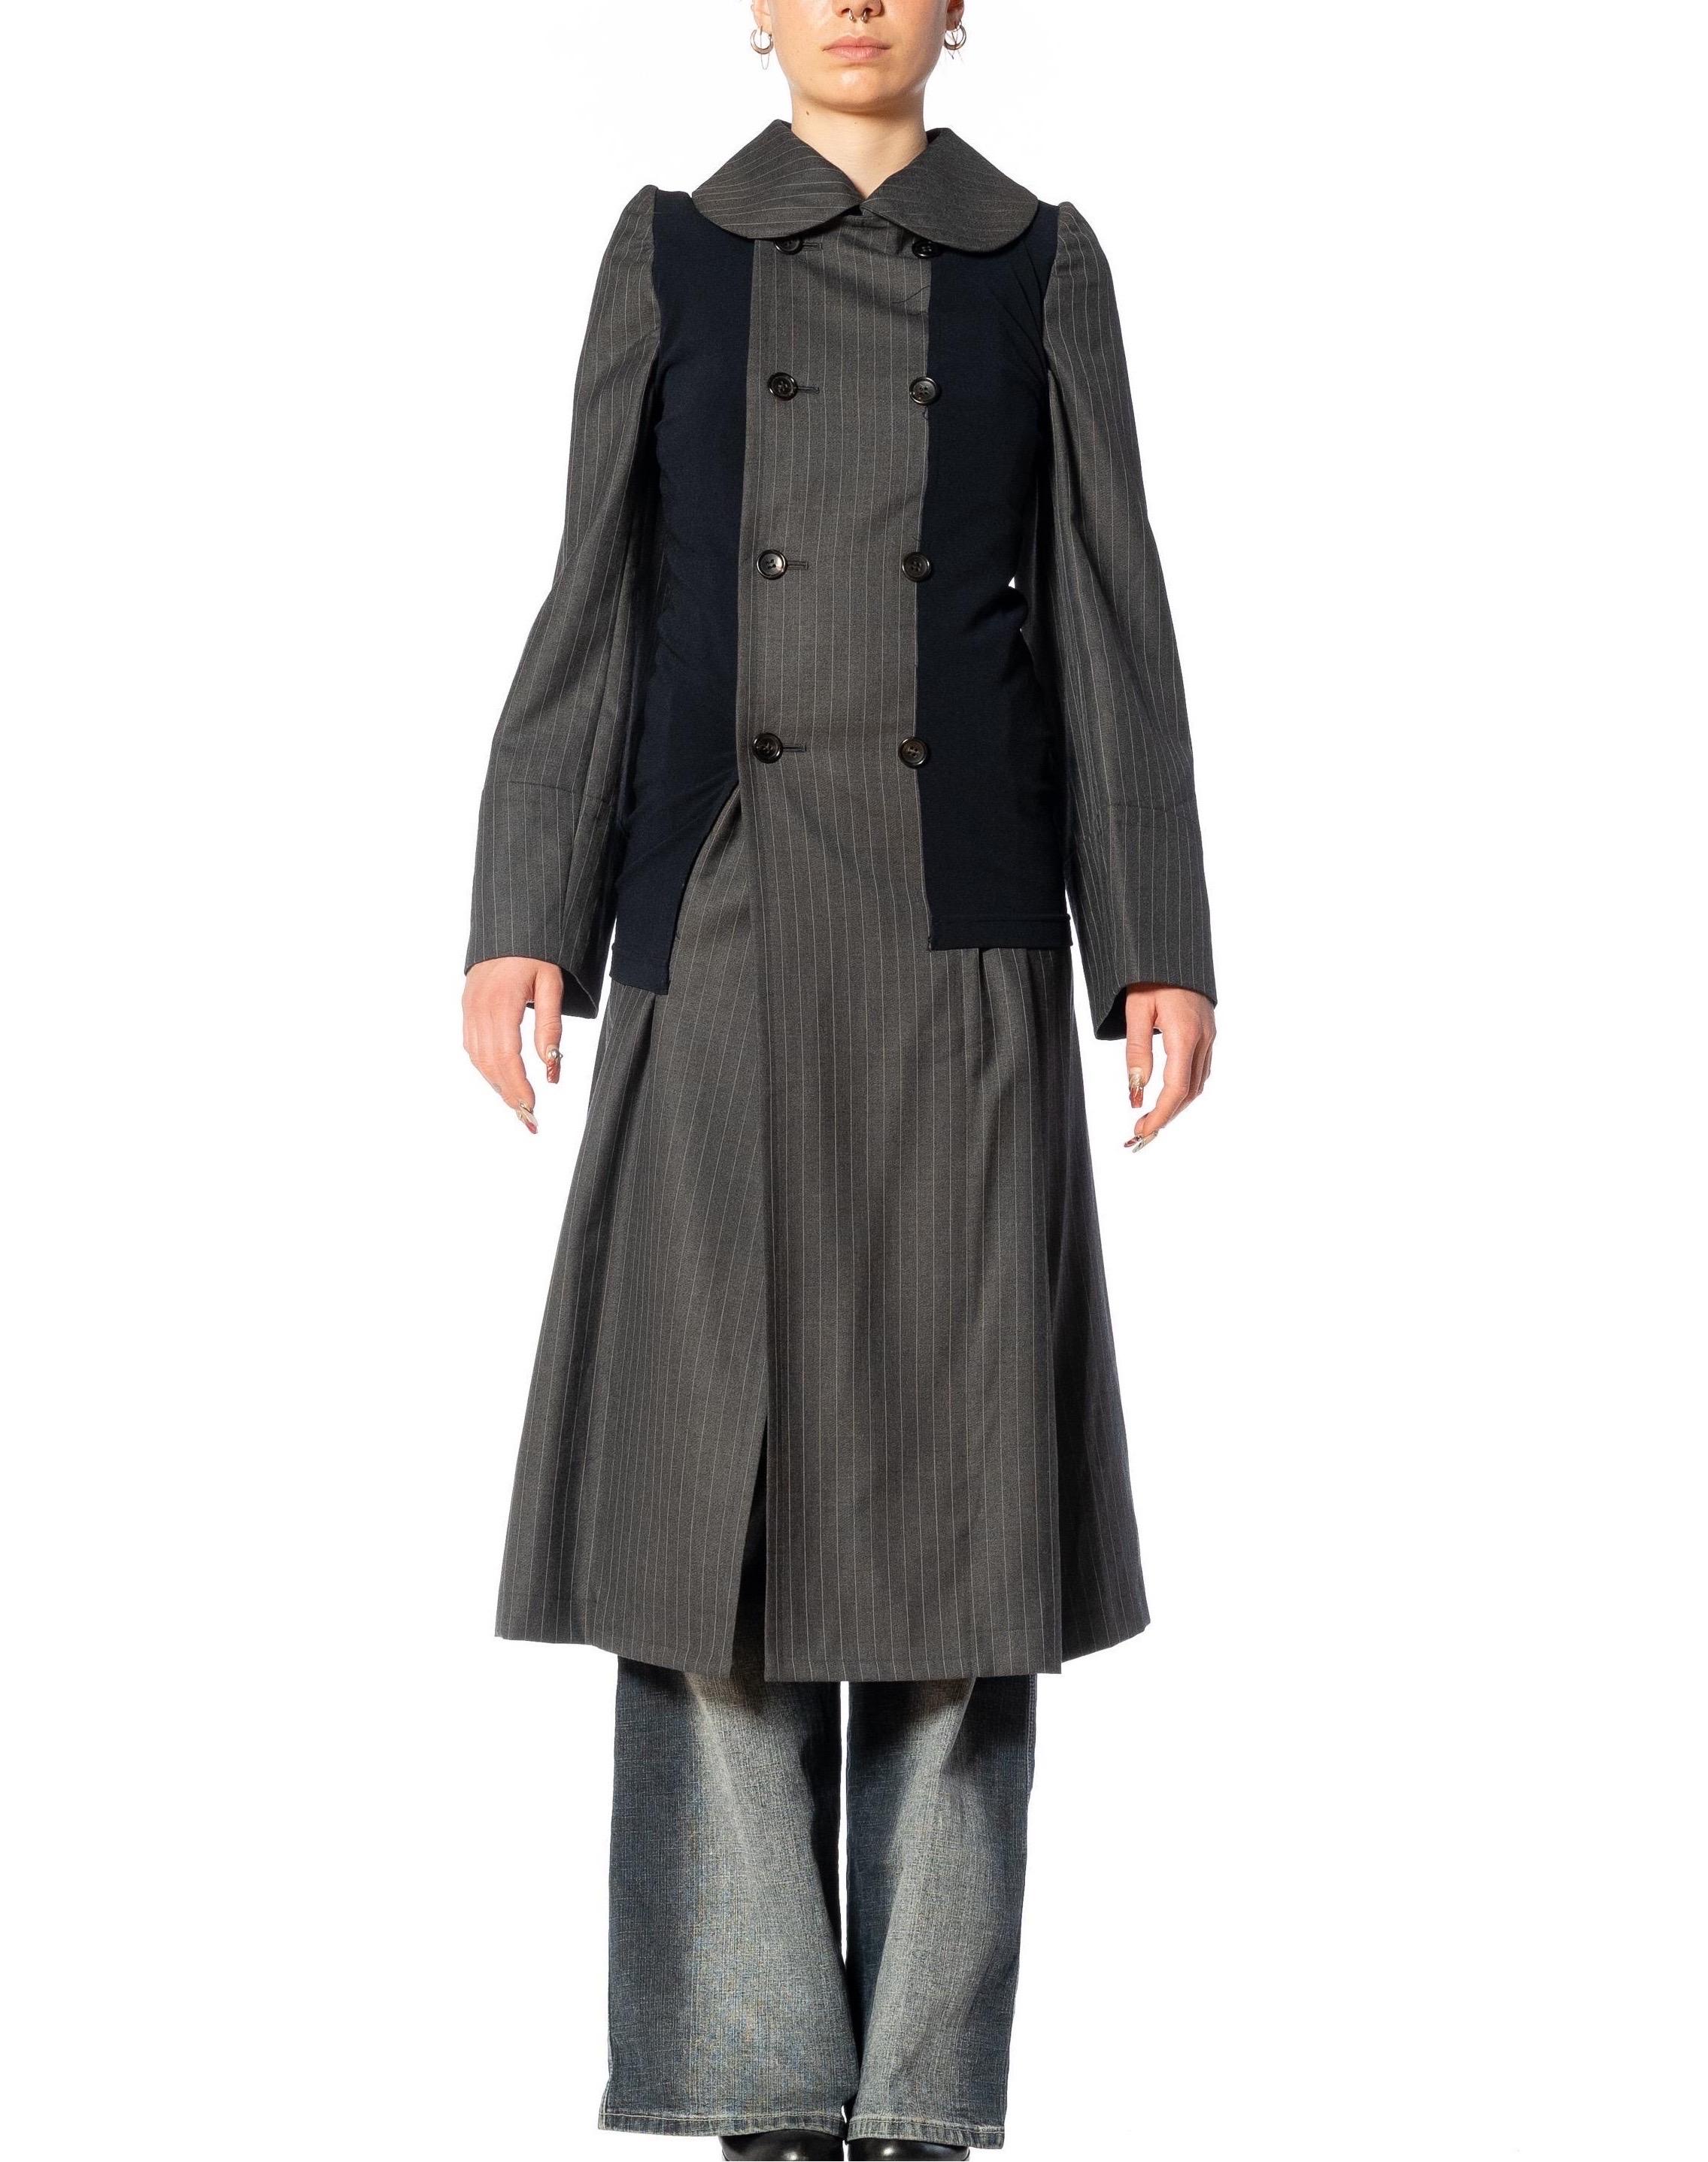 2000S COMME DES GARCONS Gray & Navy Wool Coat With Shrunken Poly Over-Layer 2007 In Excellent Condition For Sale In New York, NY